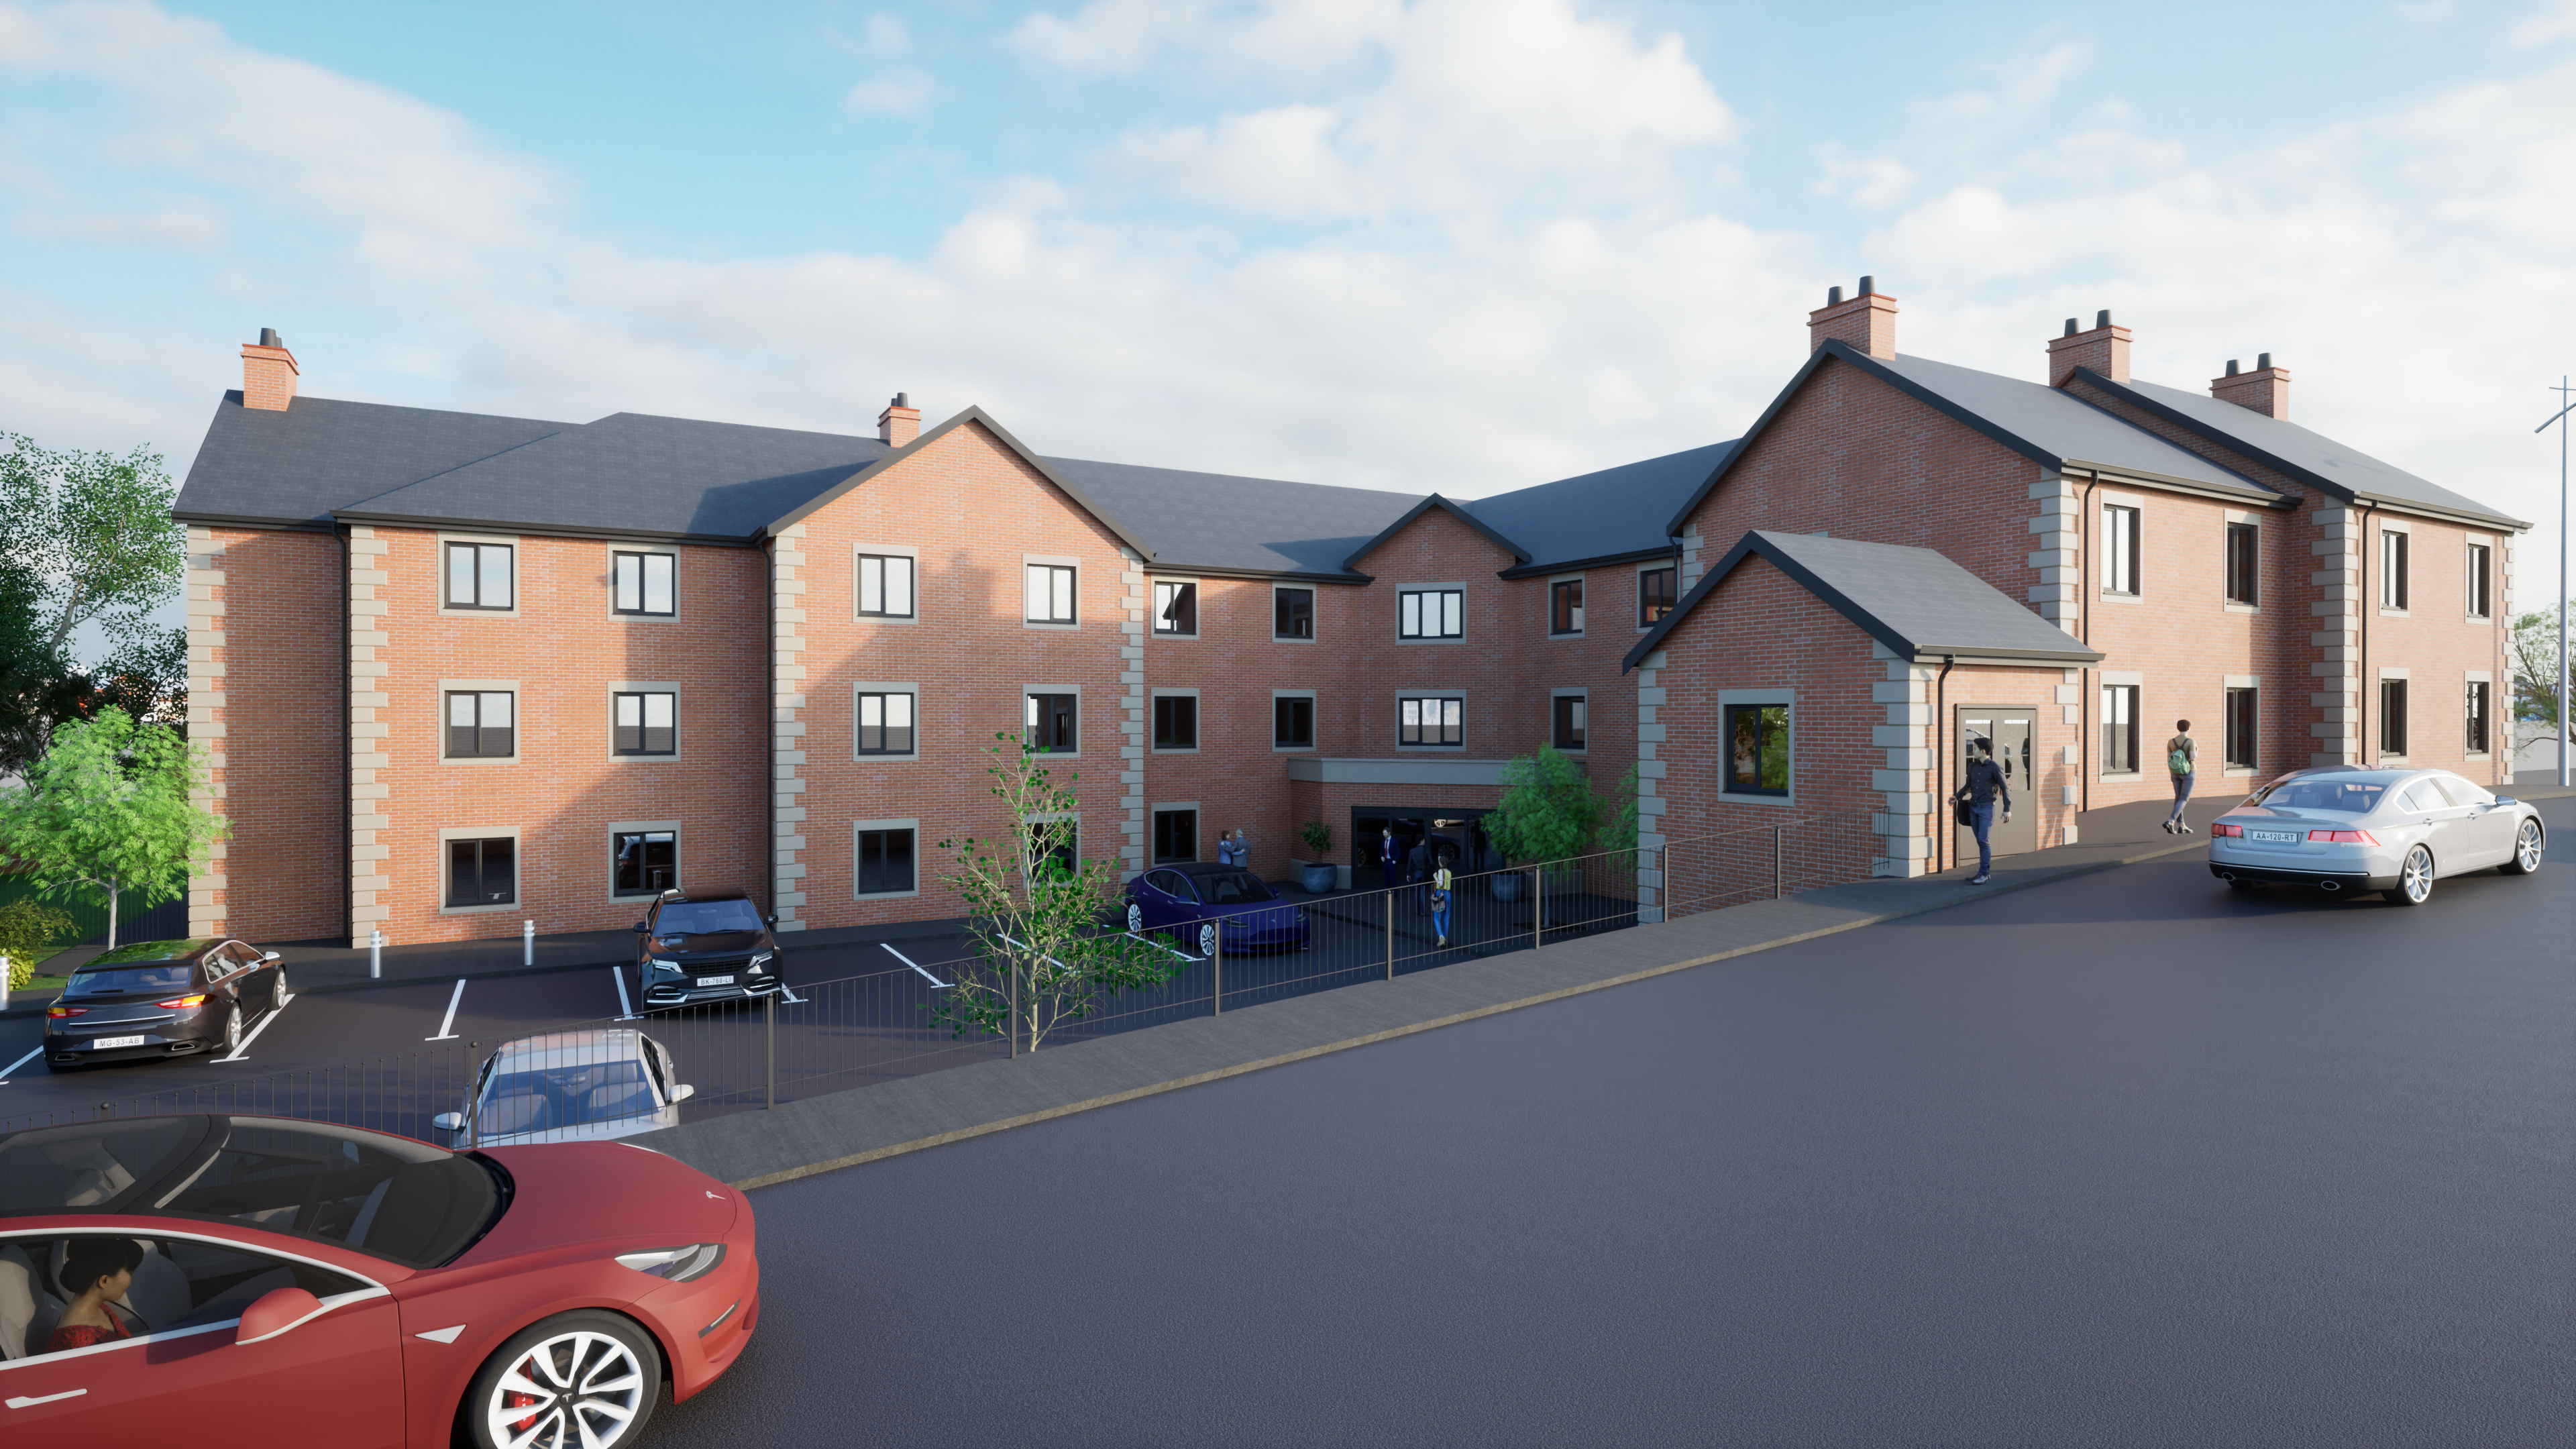 Care Home in Clitheroe, Lancashire - CGI